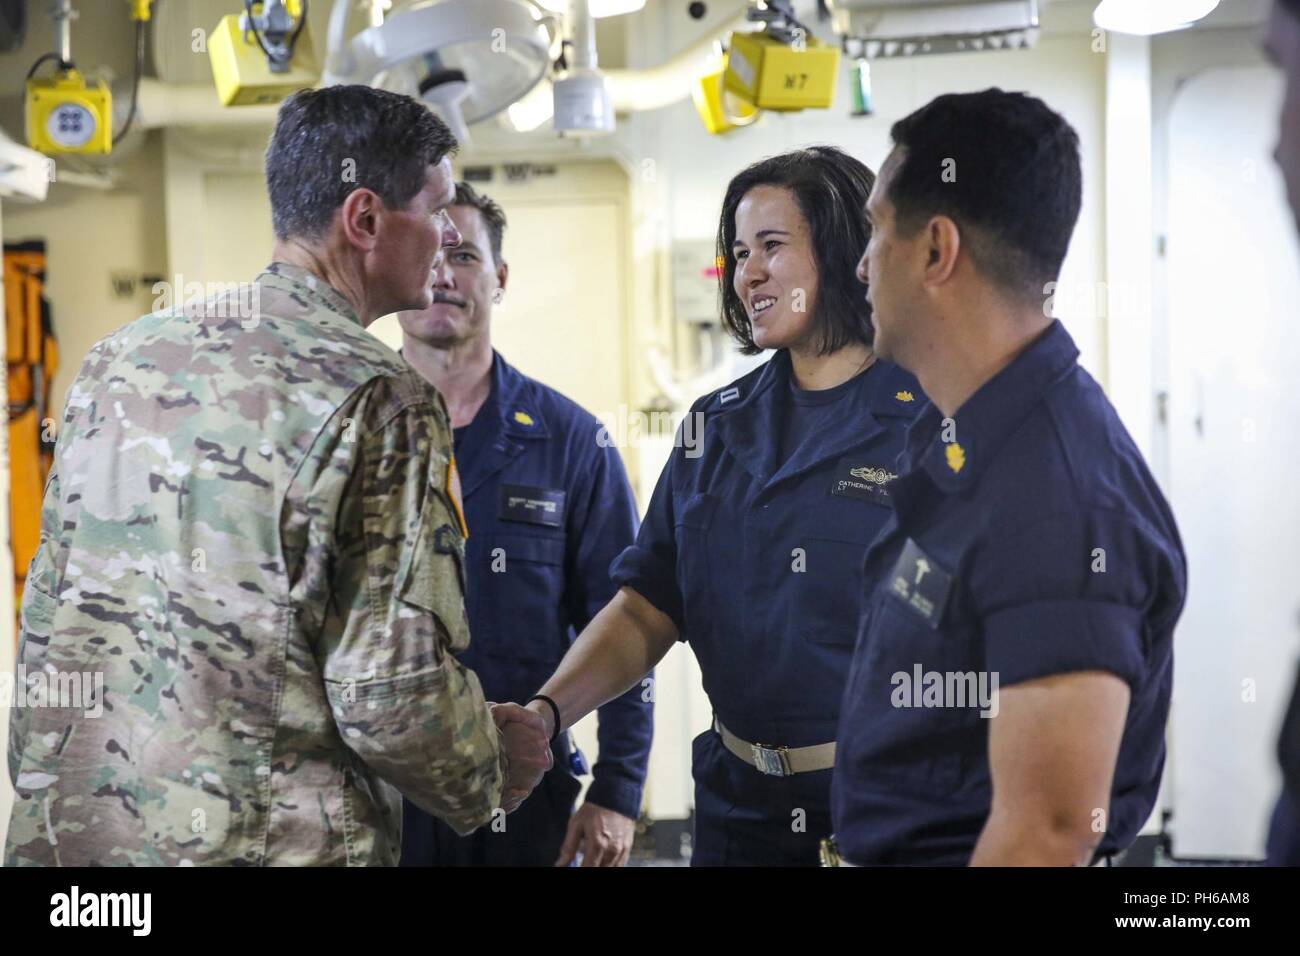 ARABIAN GULF (June 22, 2018) U.S. Army Gen. Joseph Votel, commander, U.S. Central Command,  speaks with U.S. Navy Sailors aboard the Wasp-class amphibious assault ship USS Iwo Jima (LHD 7), June 22, 2018. Votel, Vice Adm. Scott Stearney, commander, U.S. Naval Forces Central Command, and other distinguished visitors took a tour of Iwo Jima and spoke with crew members and Marines with the 26th Marine Expeditionary Unit, who are currently deployed to the U.S. 5th Fleet of operations in support of maritime security operations to reassure allies and partners and preserve the freedom of navigation a Stock Photo